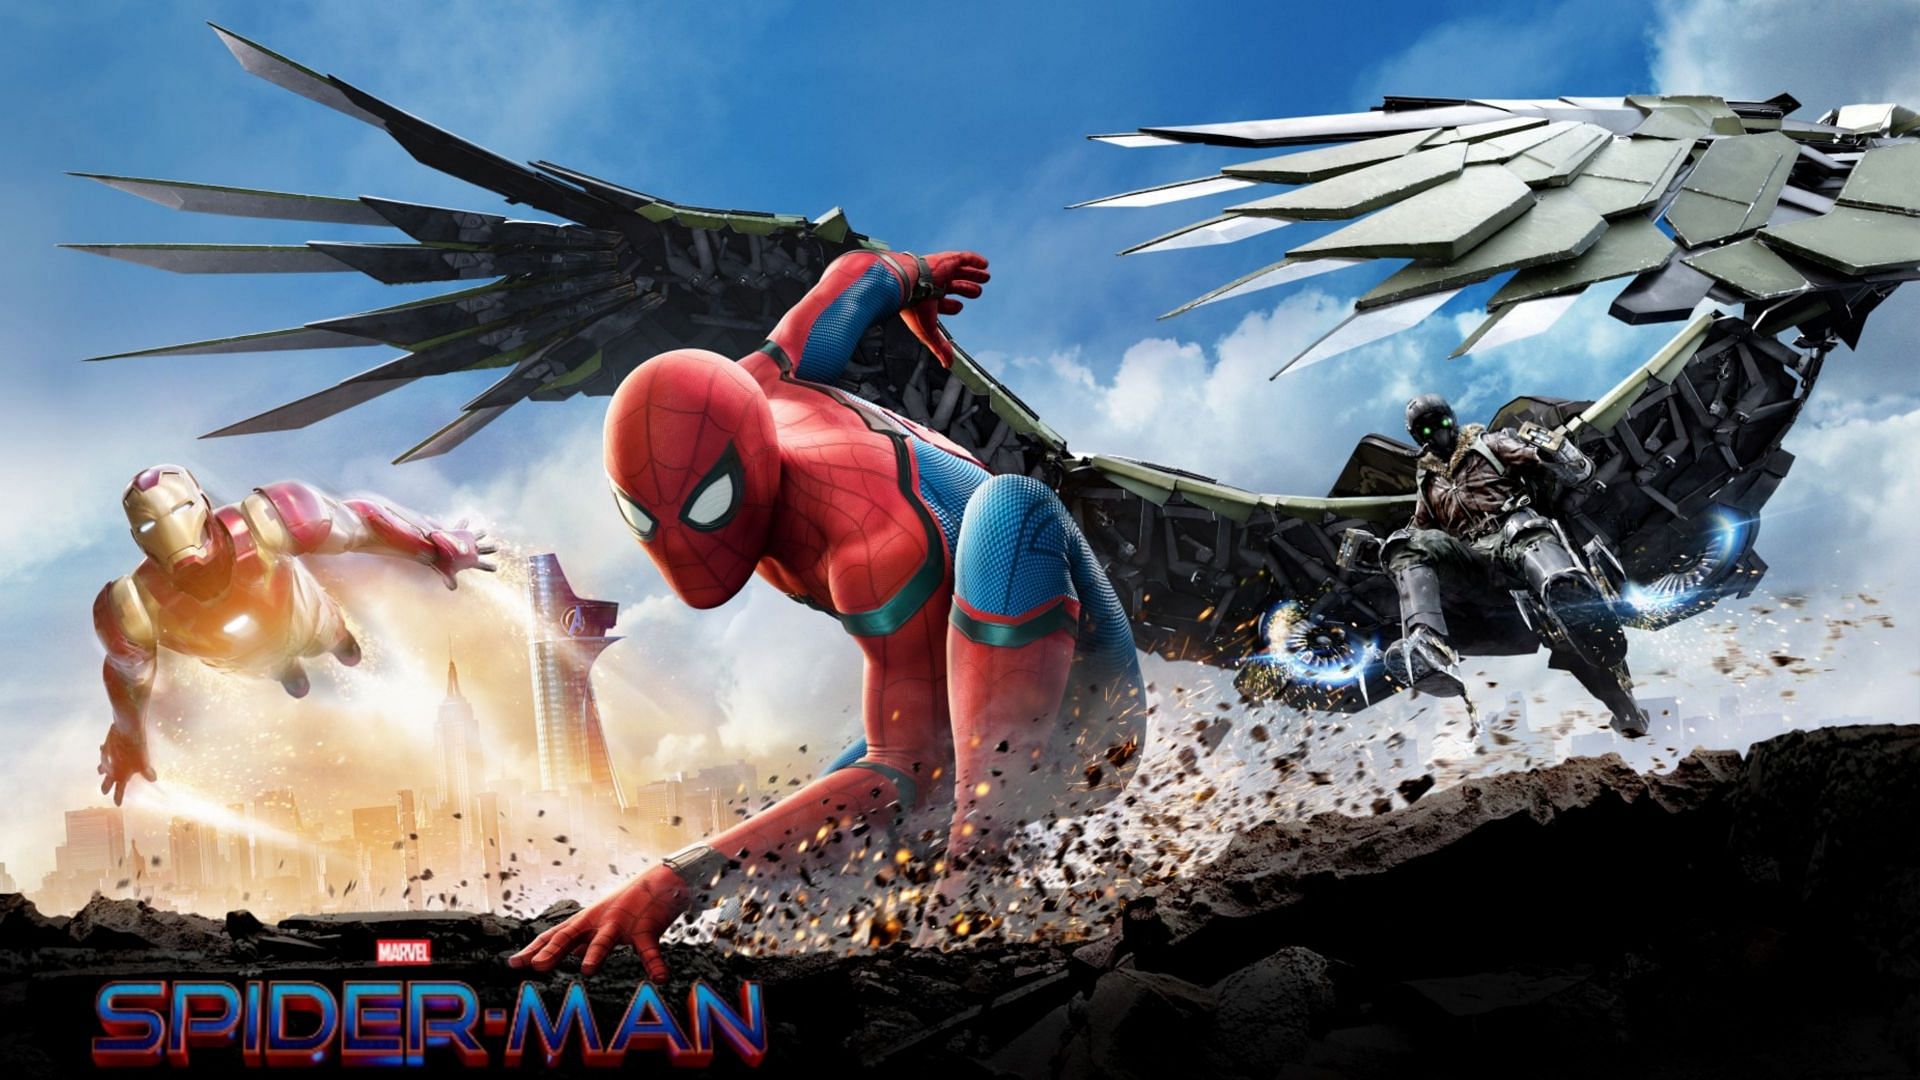 In the final fight scene, Spider-Man and the Vulture face off in an intense and dramatic battle. (Image Via Sportskeeda)